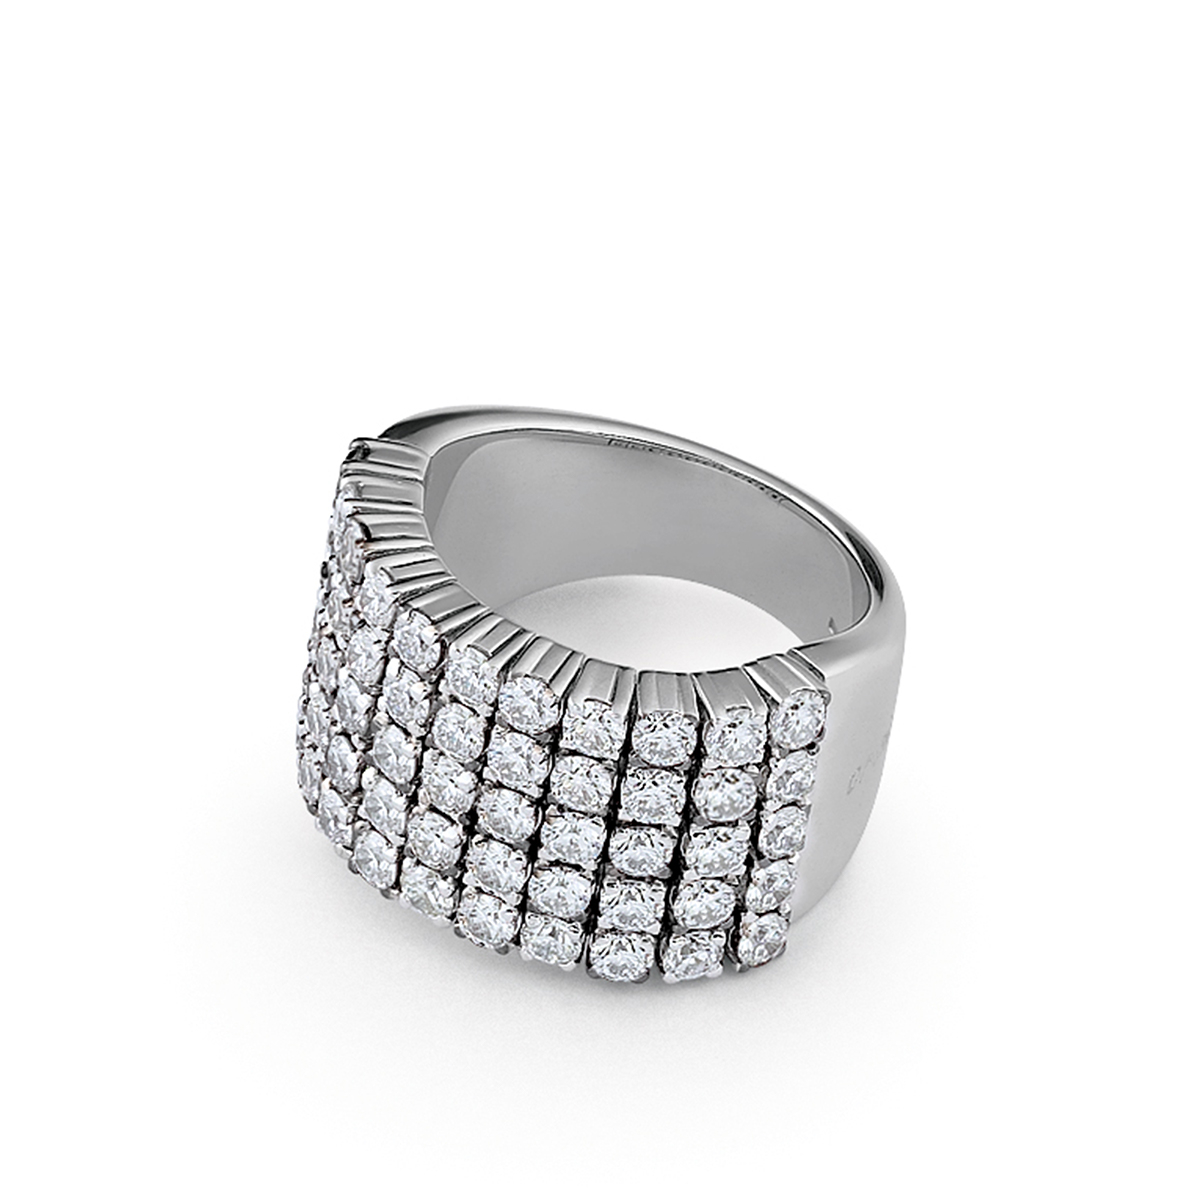 18 kt White Gold Ring with rigid shank and soft 5-row mesh